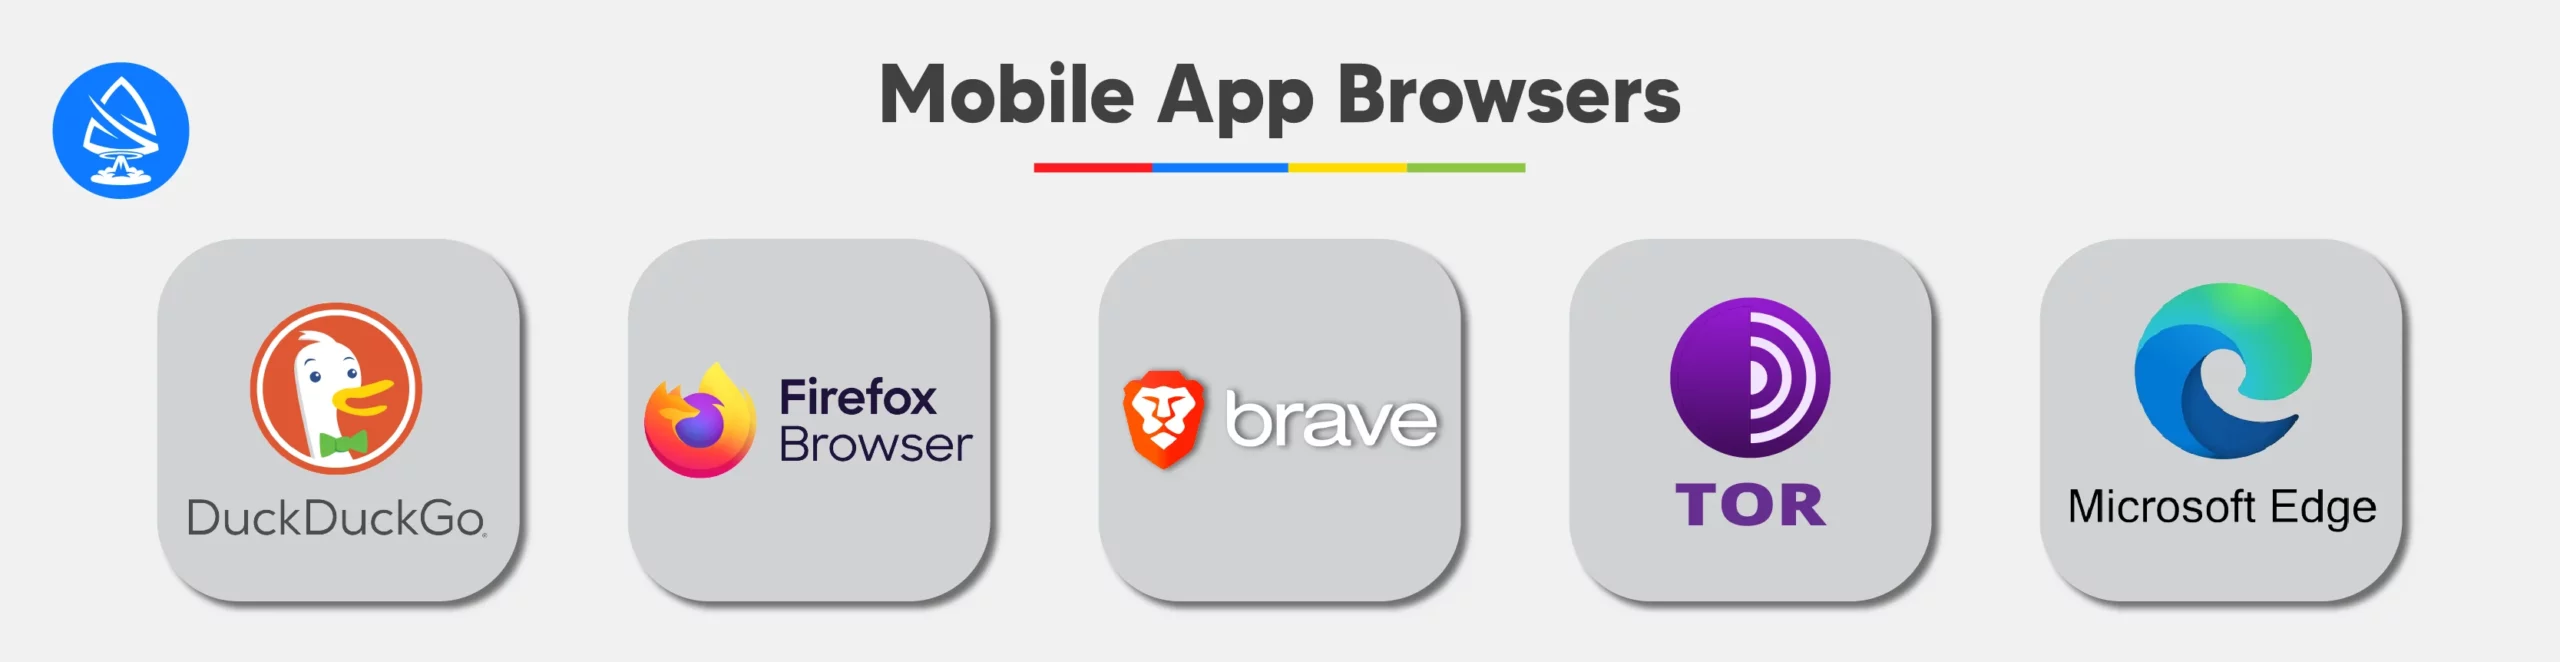 Mobile App Browsers